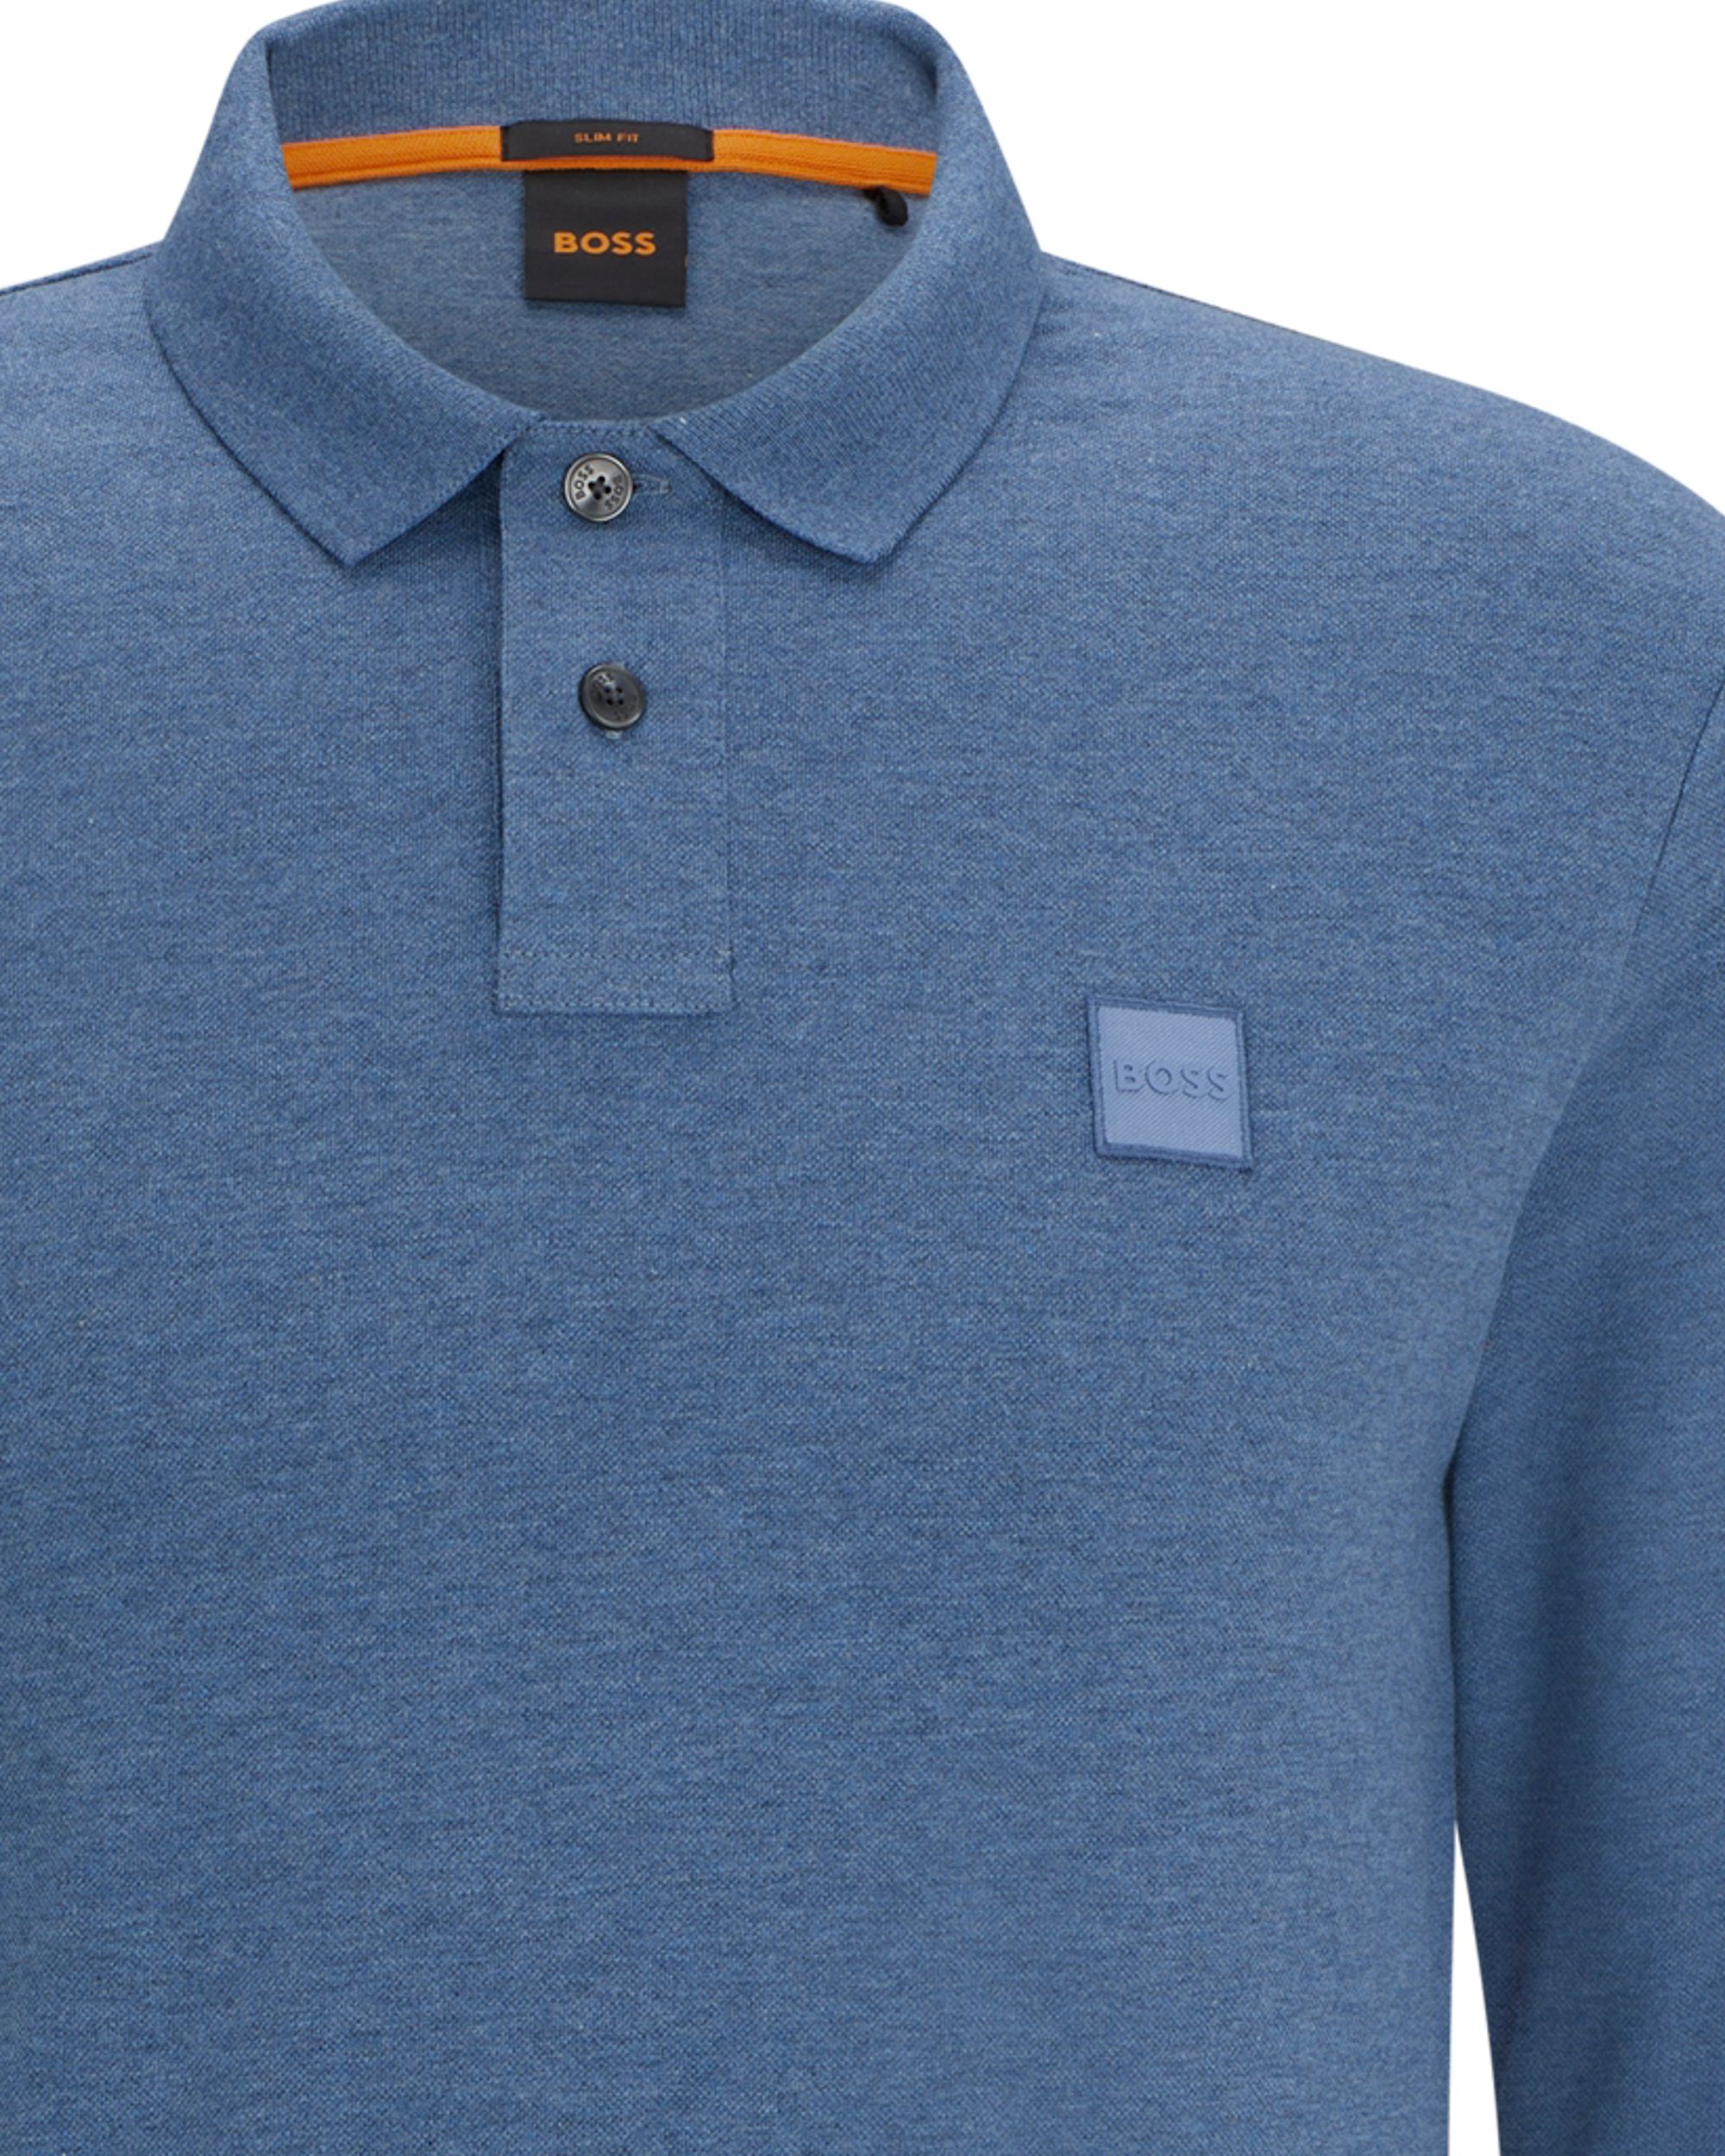 Boss Passerby Polo LM Blauw 092736-001-L